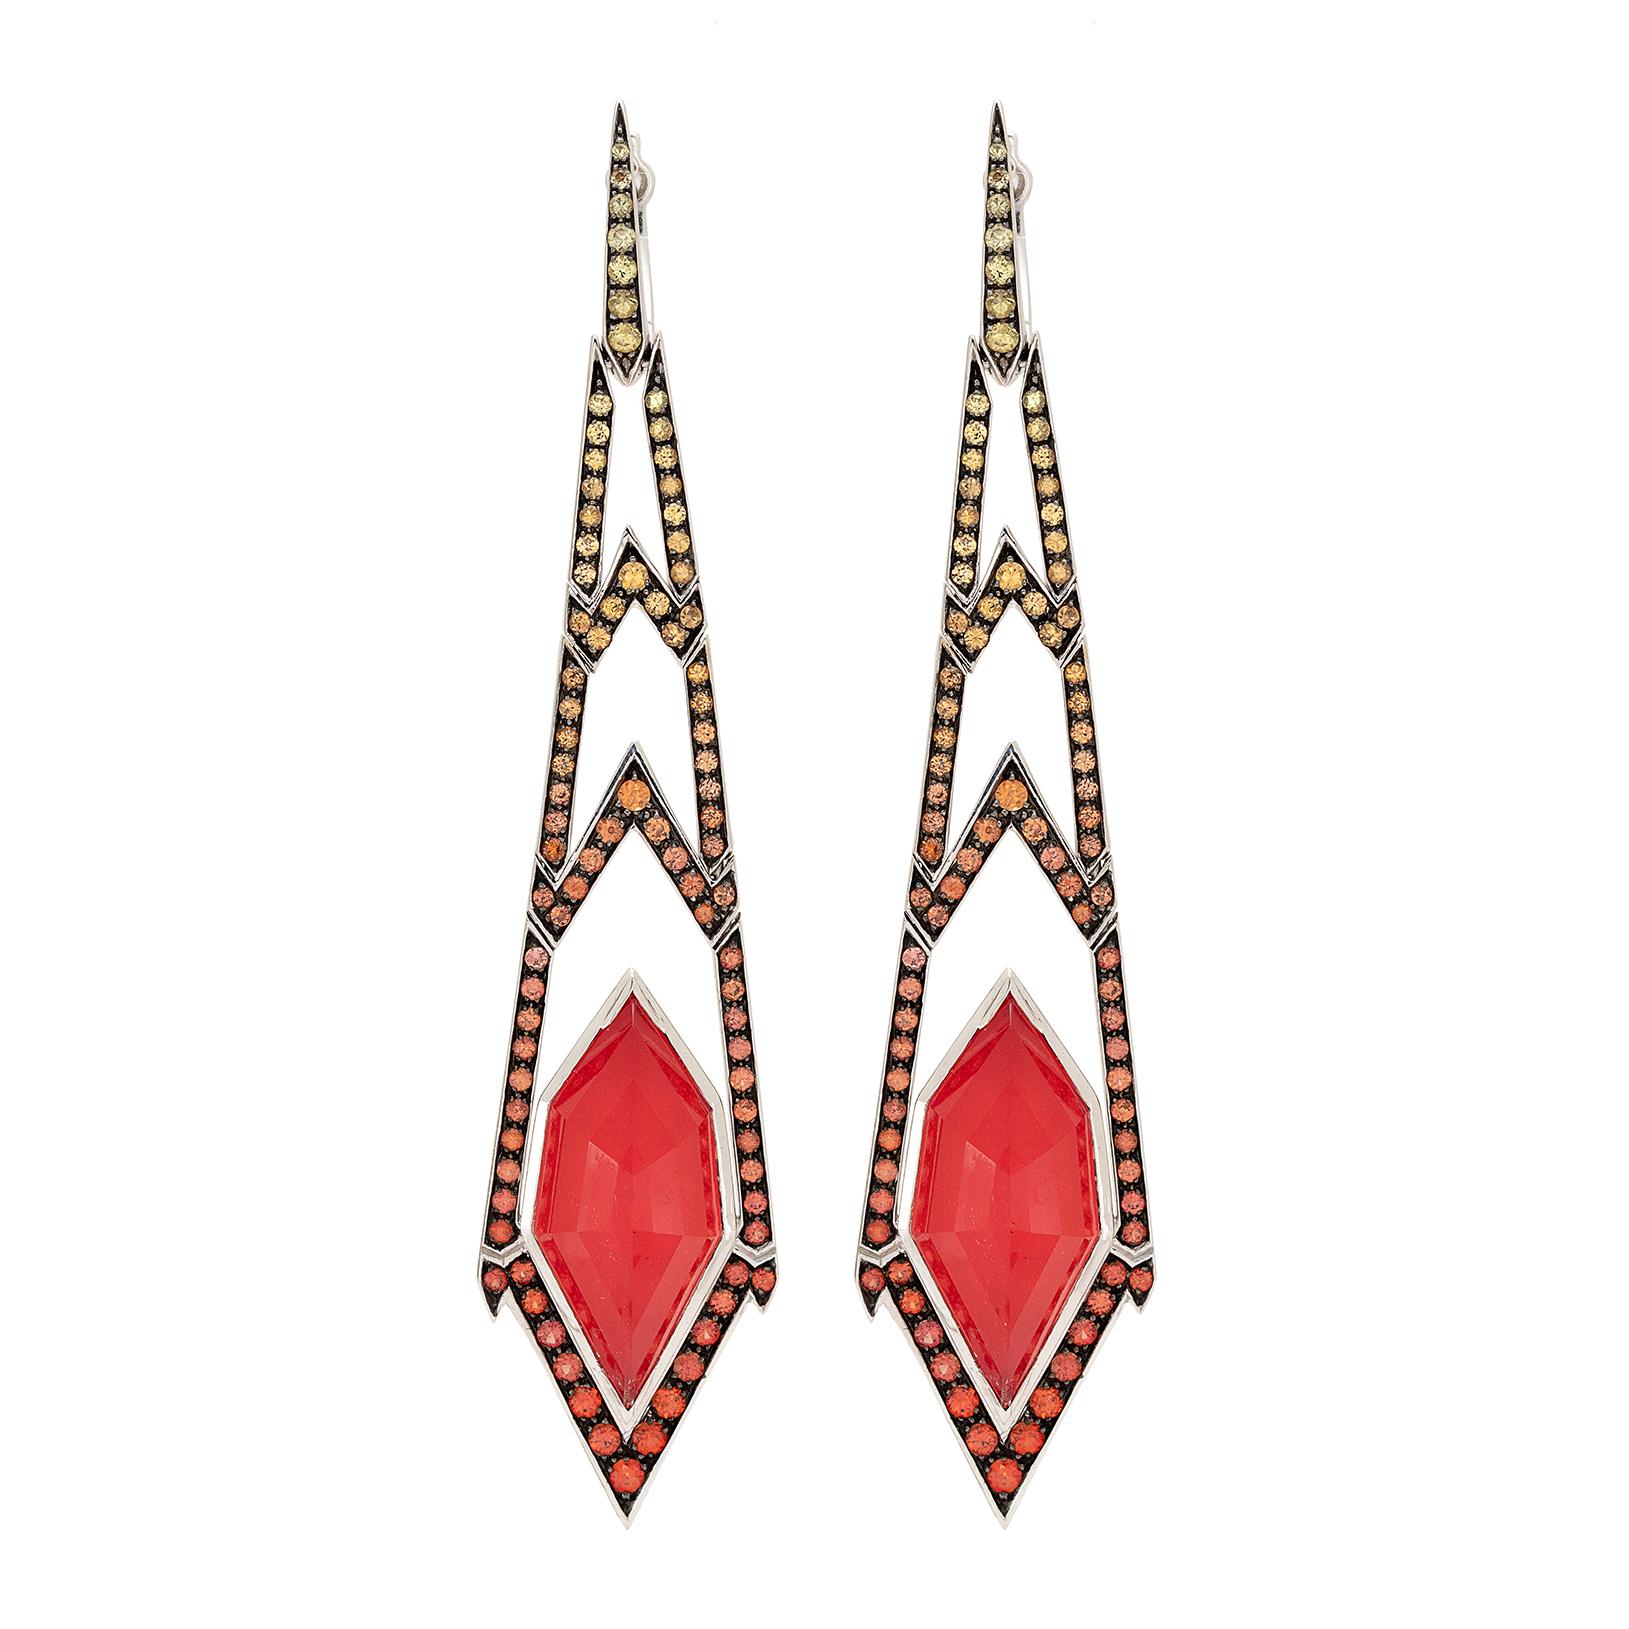 Stephen Webster Coral, Quartz and Multi-Color Sapphire Earrings